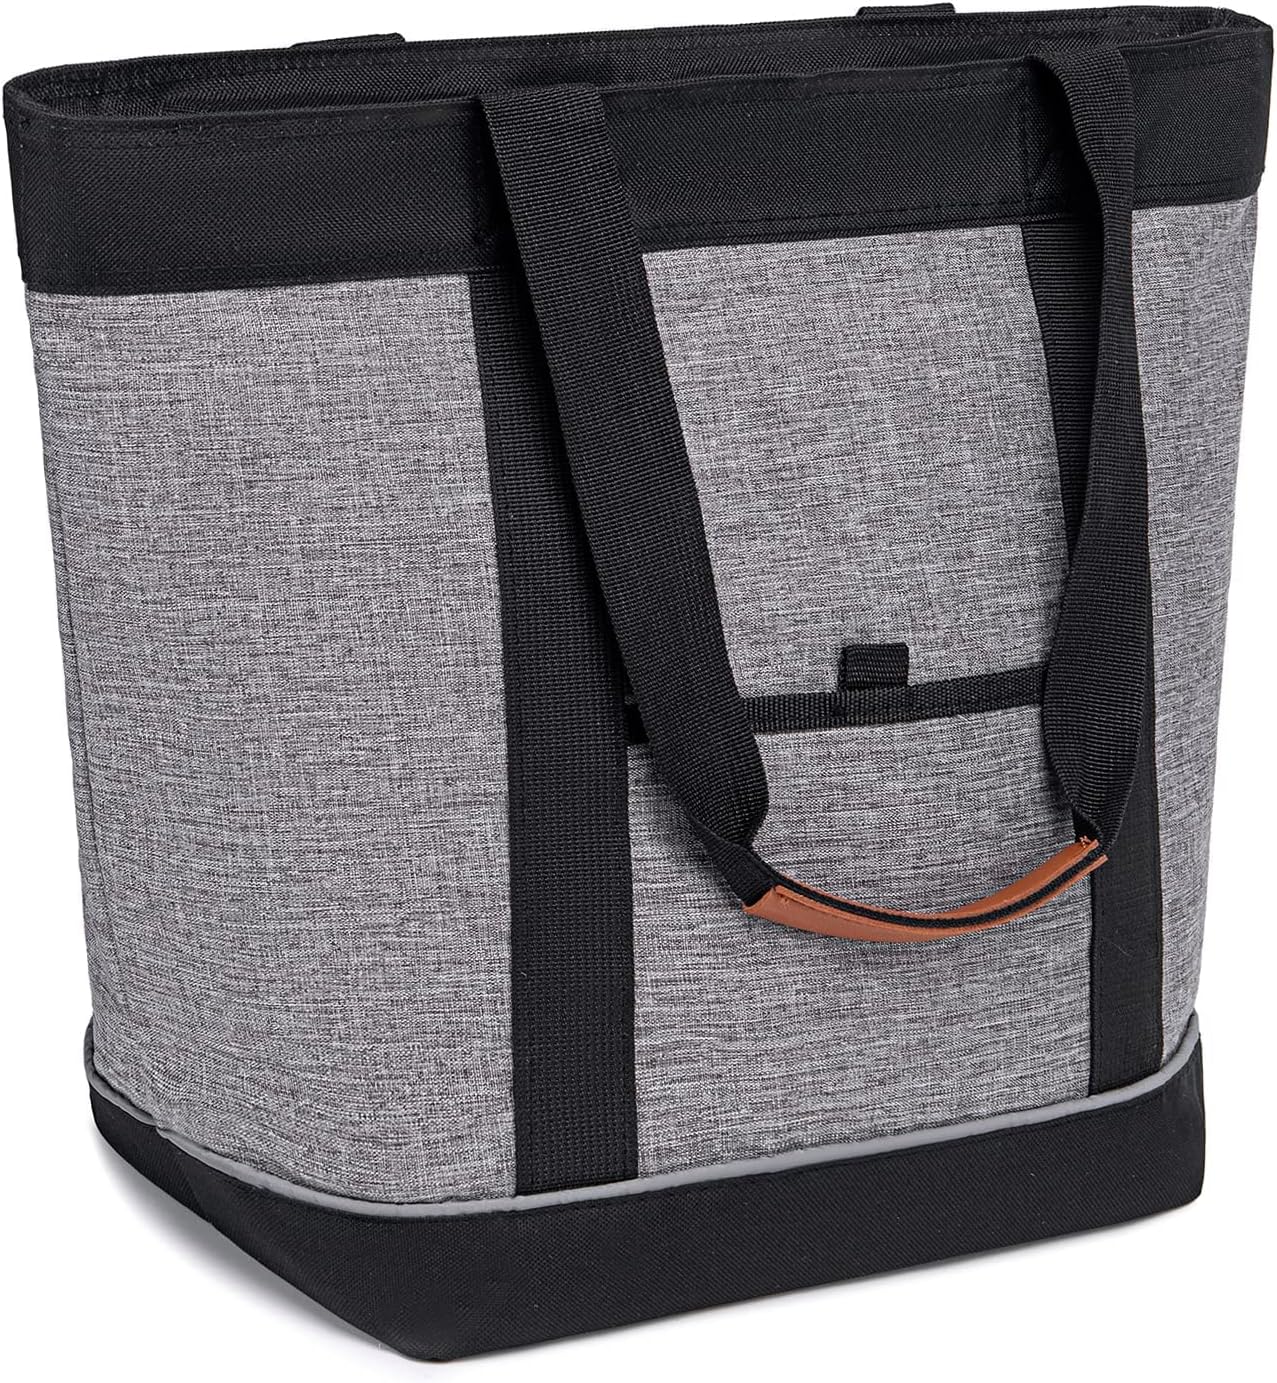 Insulated Cooler Bag Reusable Grocery Tote Bags [...]